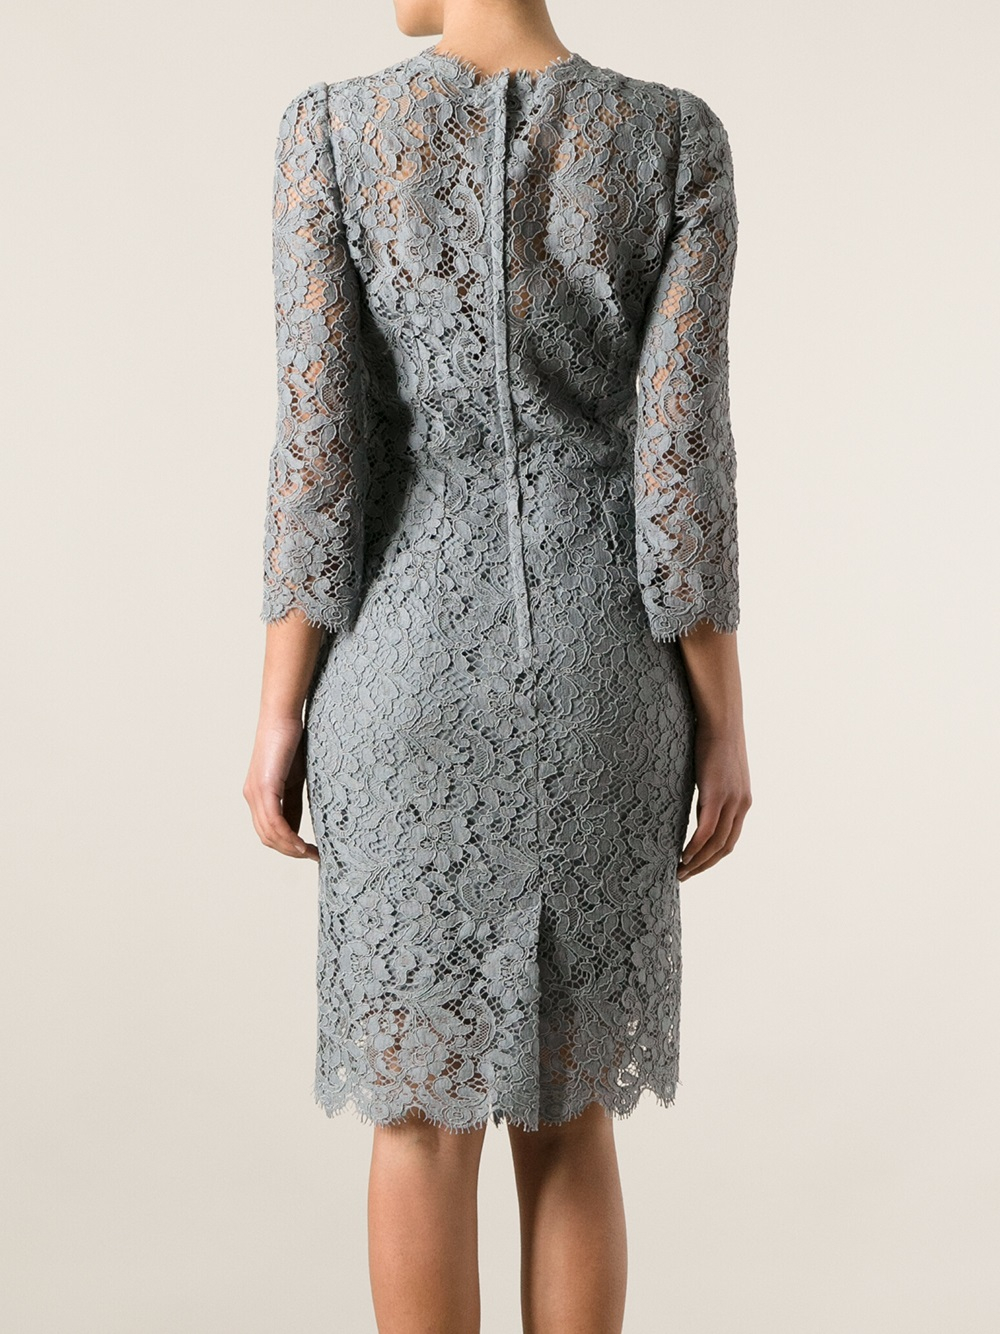 Dolce & Gabbana Floral Lace Dress in Gray | Lyst